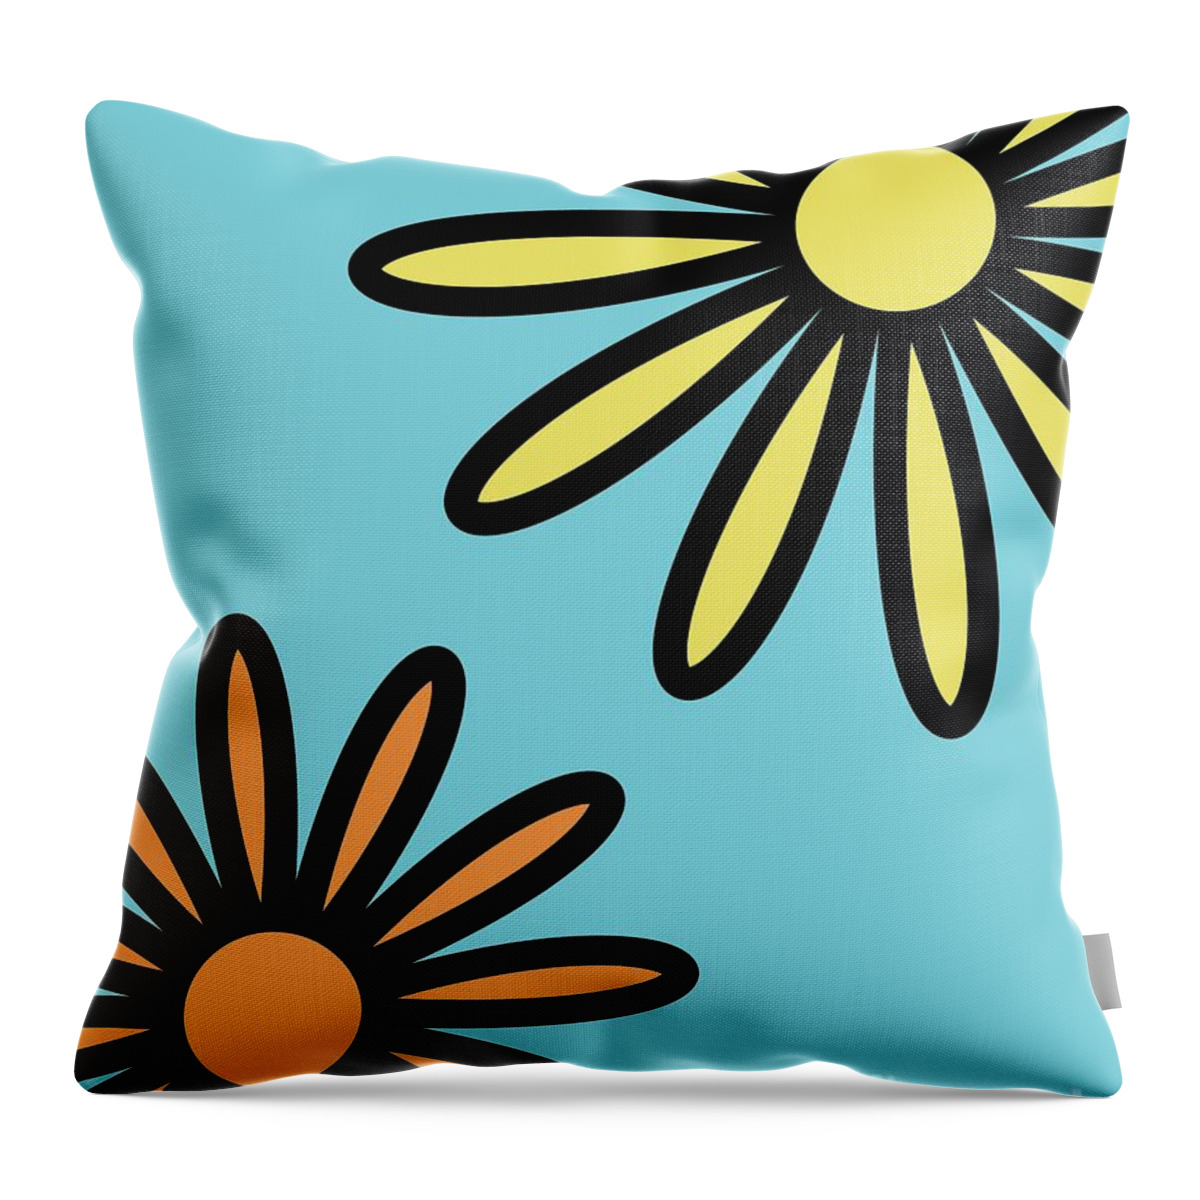 Mod Throw Pillow featuring the digital art Mod Flowers 2 on Blue by Donna Mibus